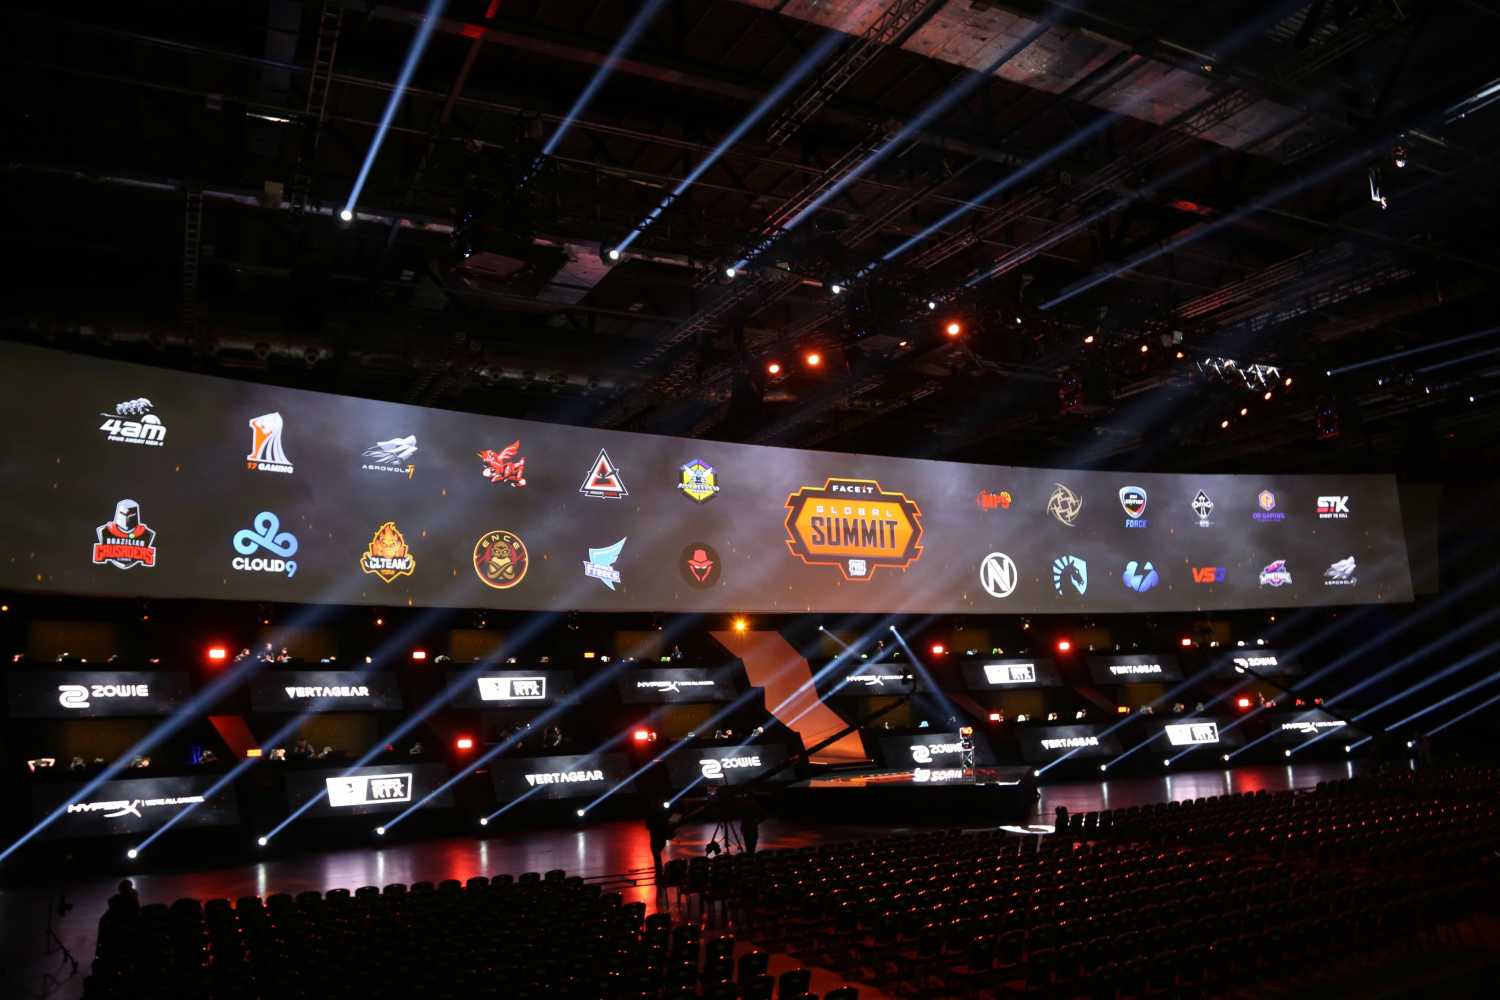 The multi-stage tournament was held at London’s ExCel